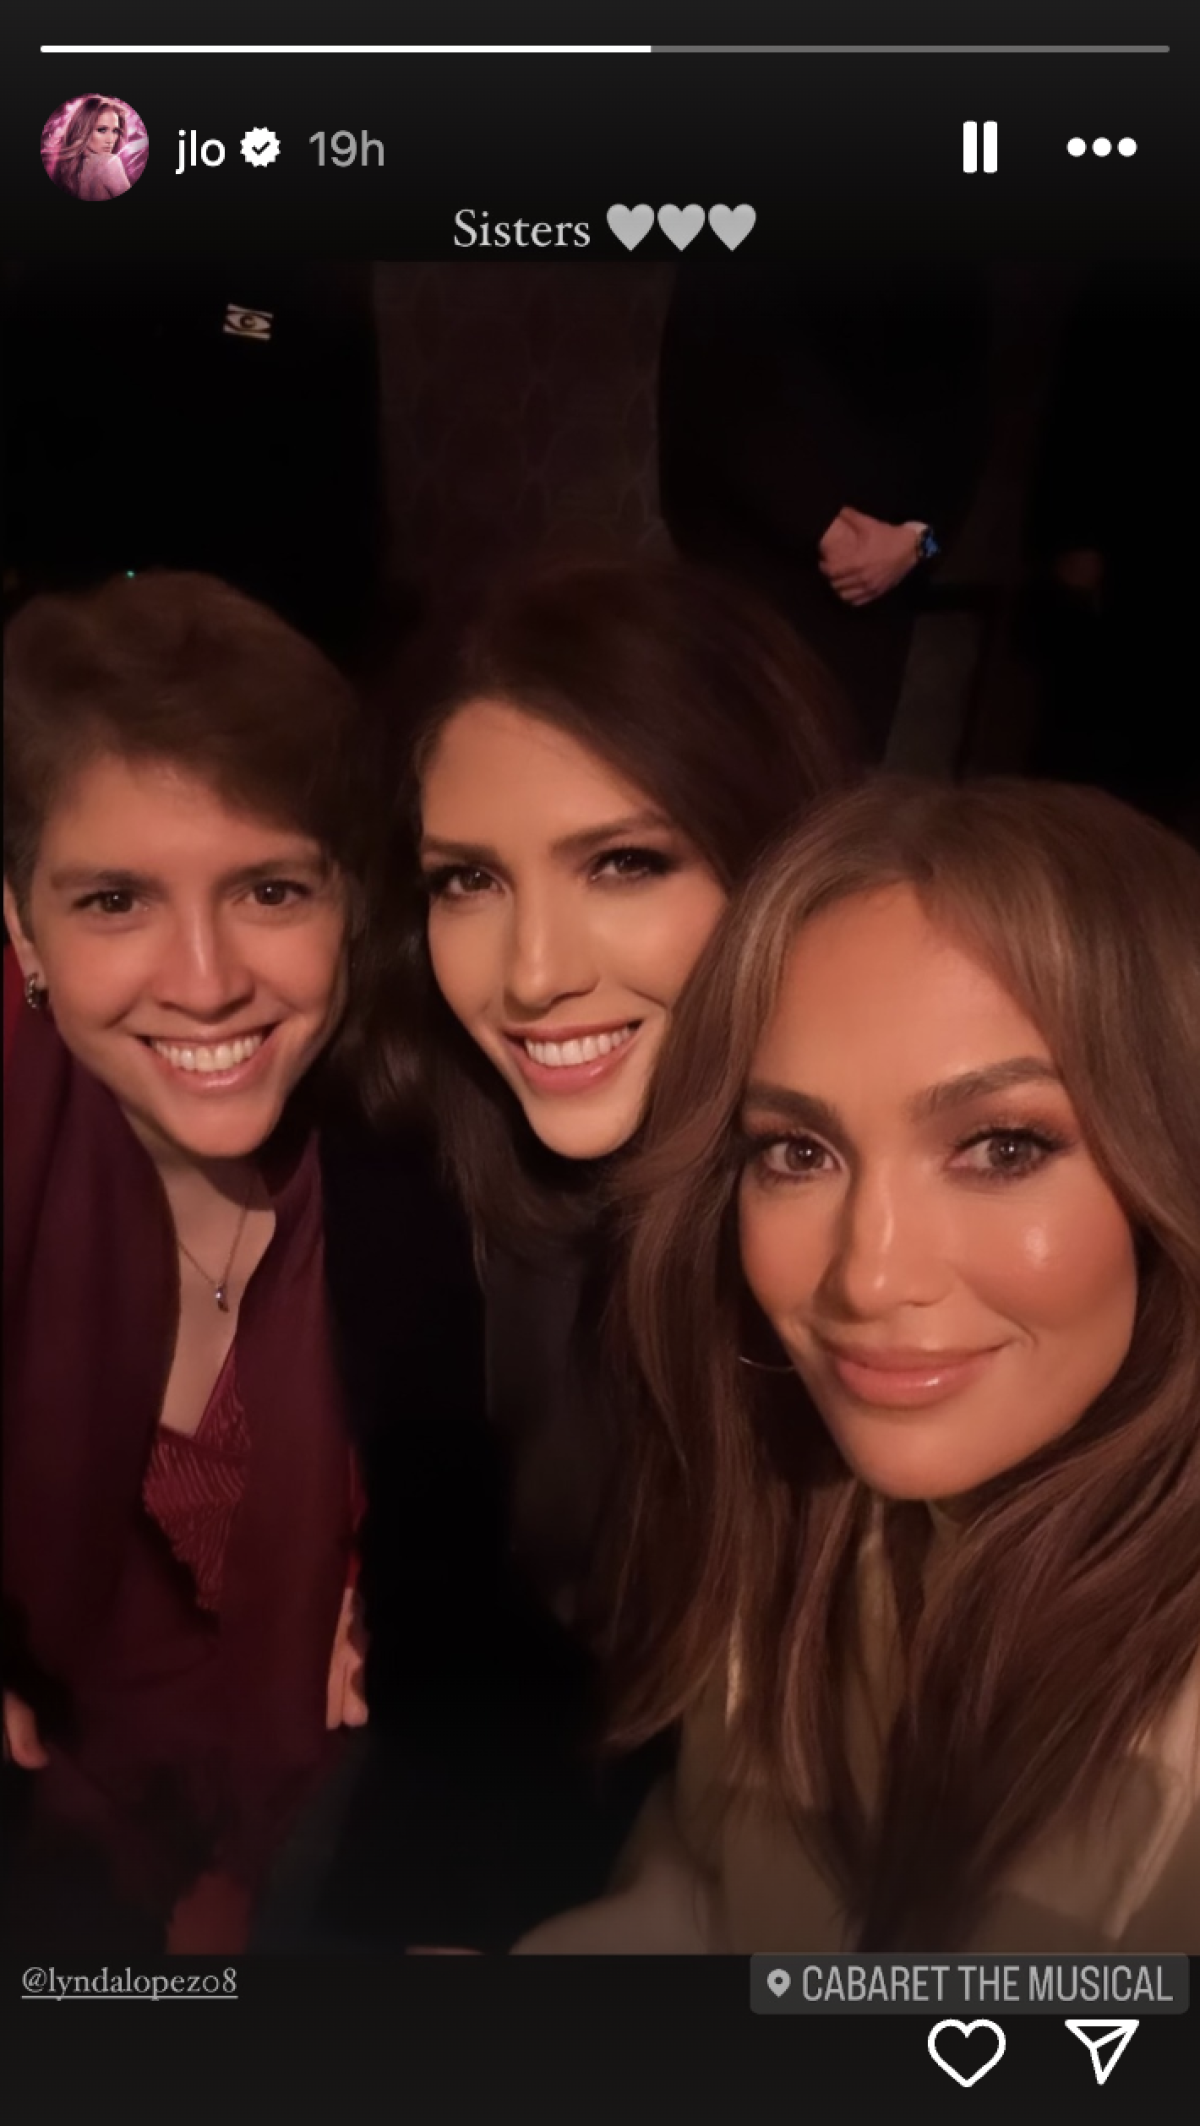 Jennifer Lopez shares a selfie with her sisters